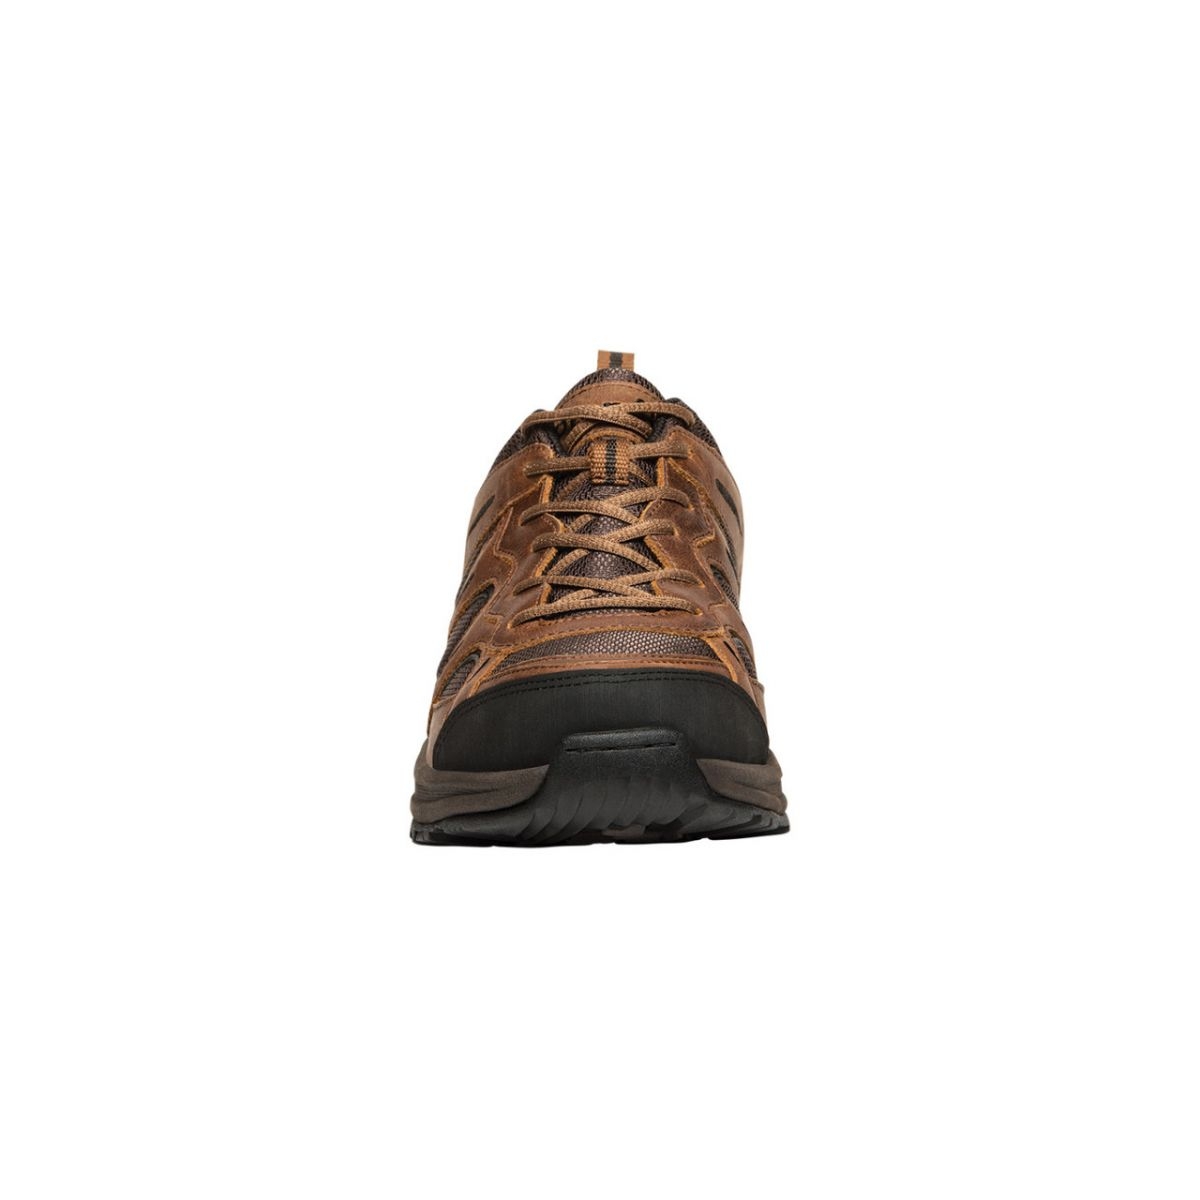 Propet Men's Connelly Hiking Shoe Brown - M5503BR BROWN - BROWN, 8-D